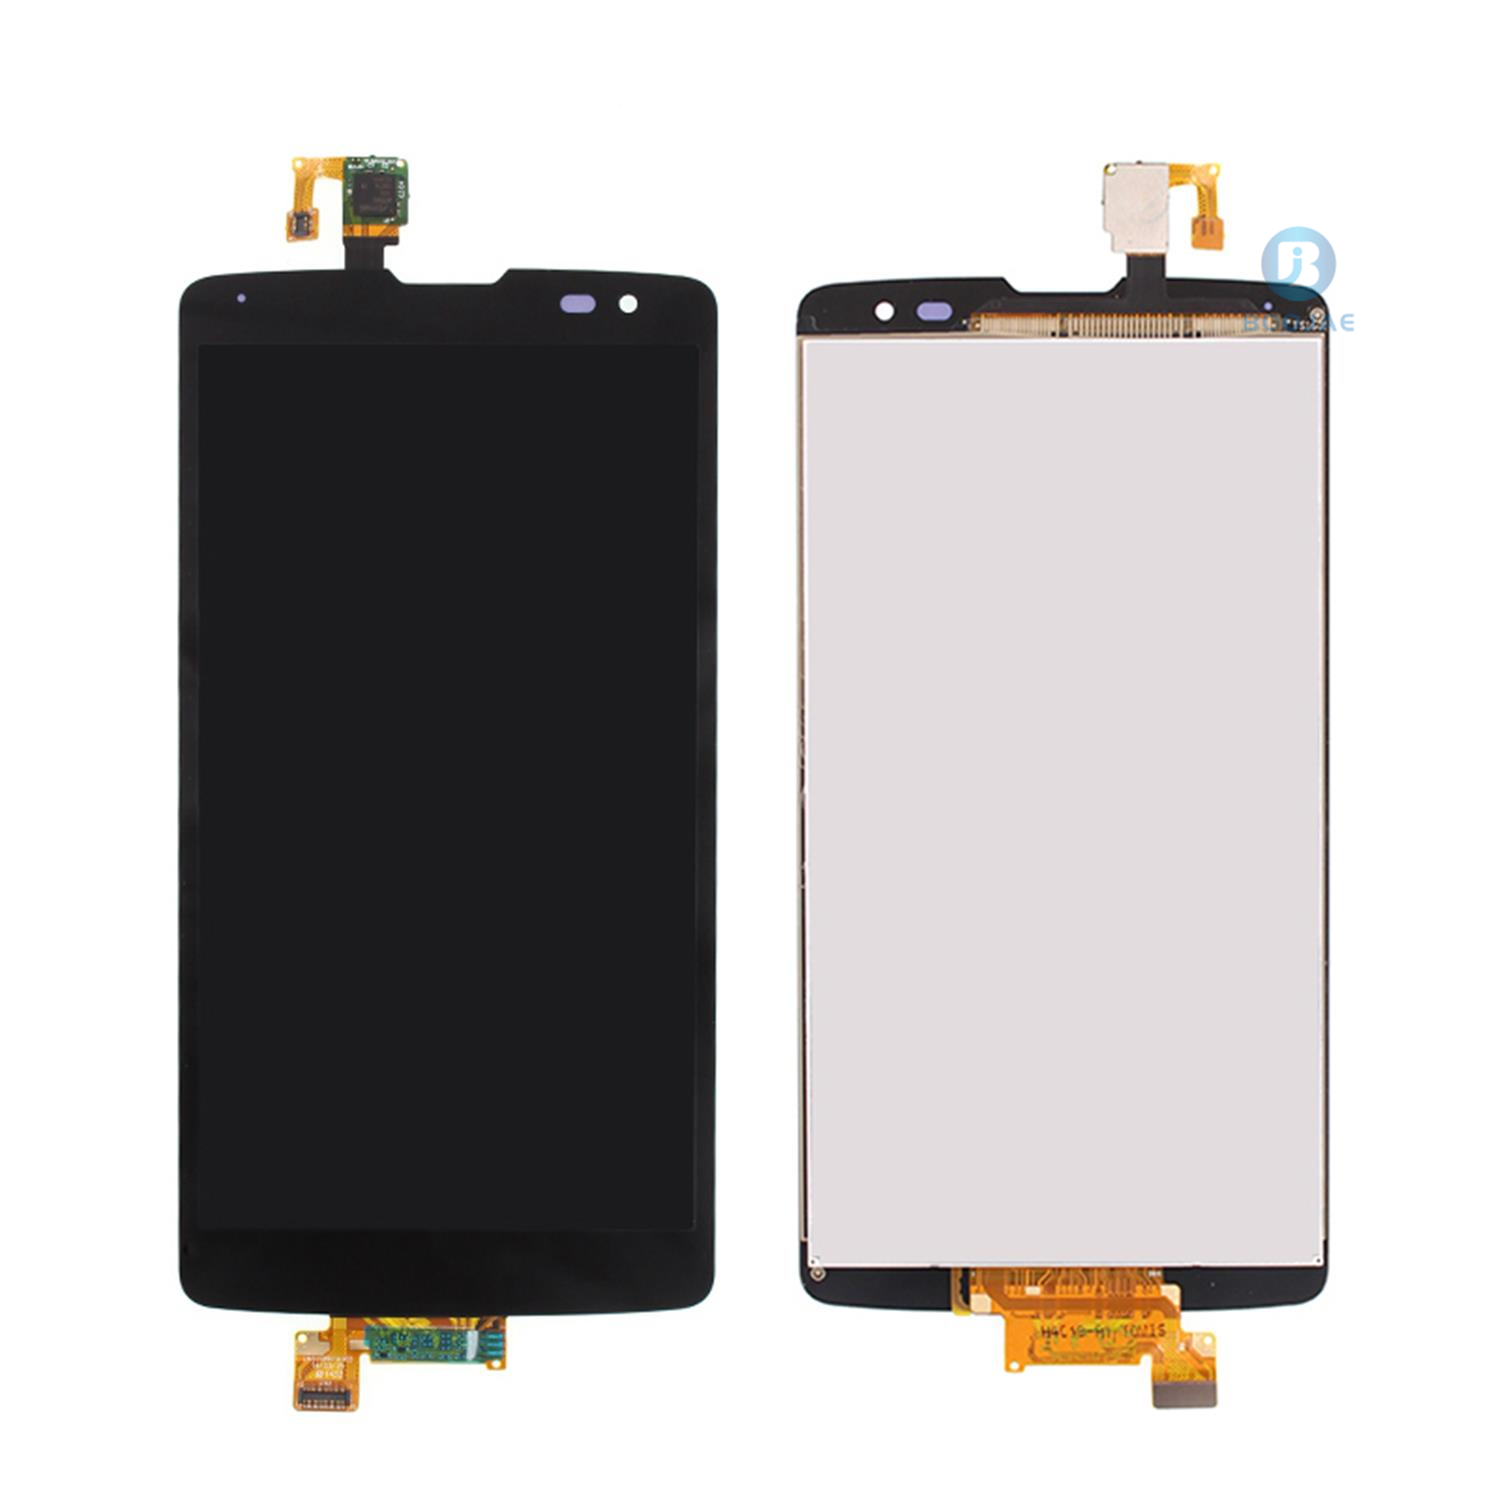 For LG G Vista D631 LCD Screen Display and Touch Panel Digitizer Assembly Replacement